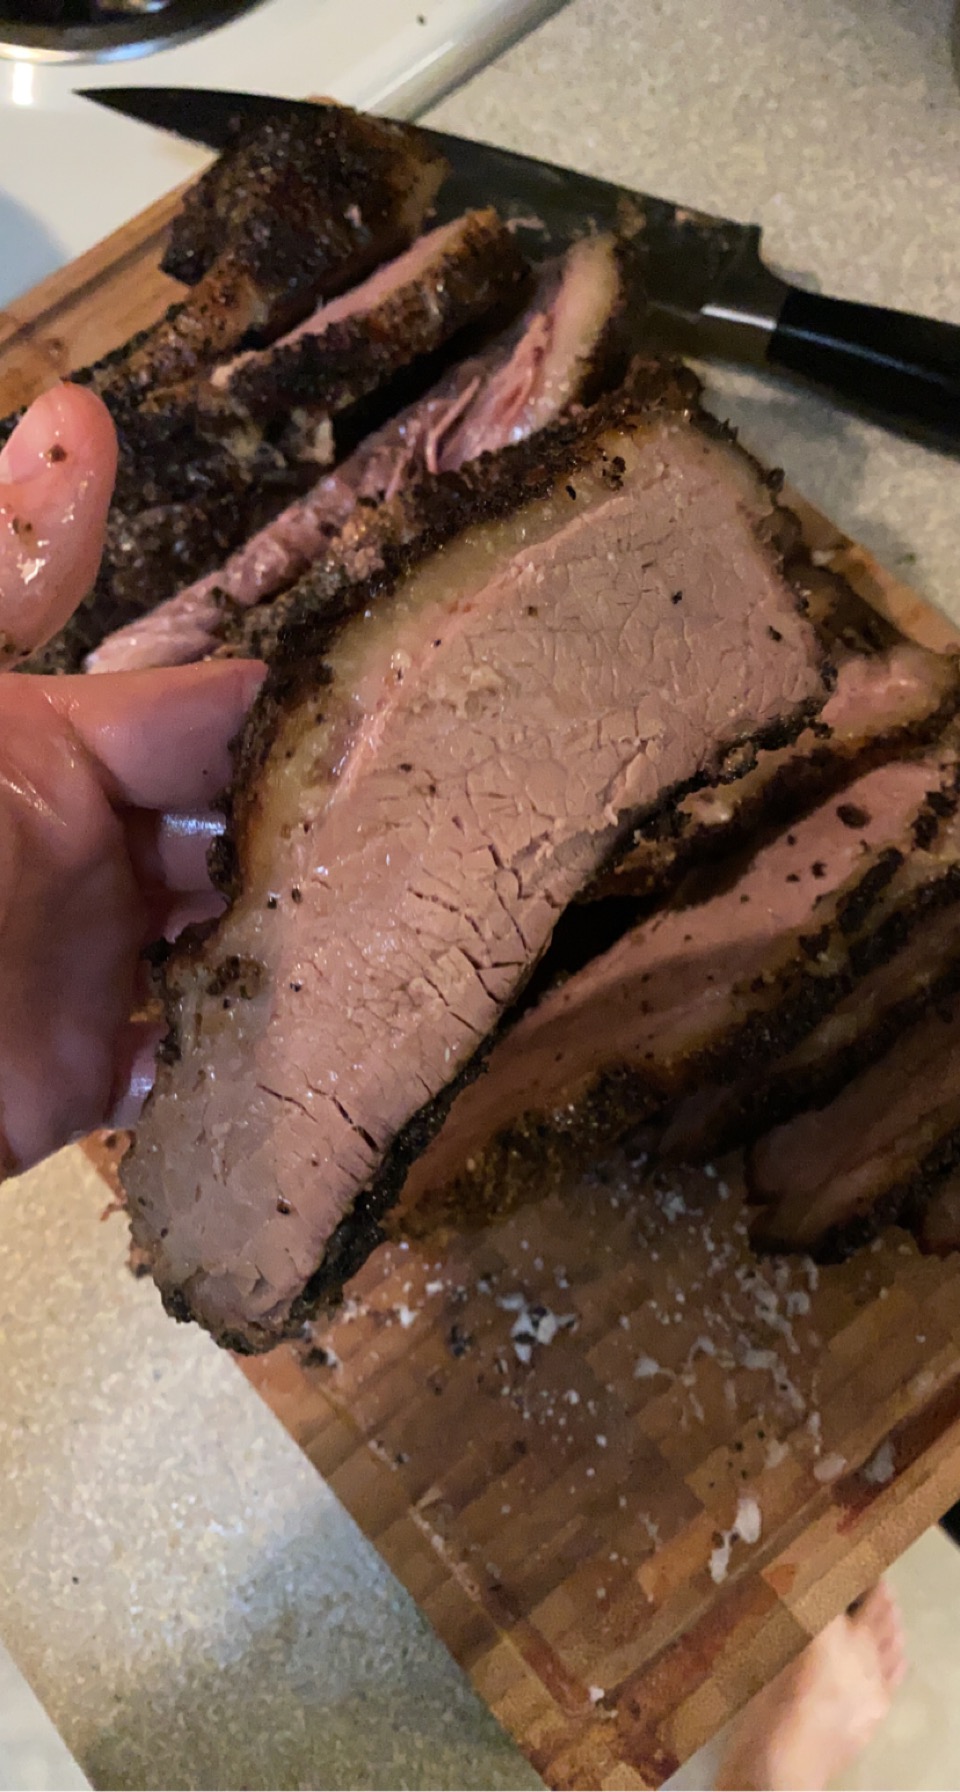 8 Pro Tips About When To Pull Your Brisket